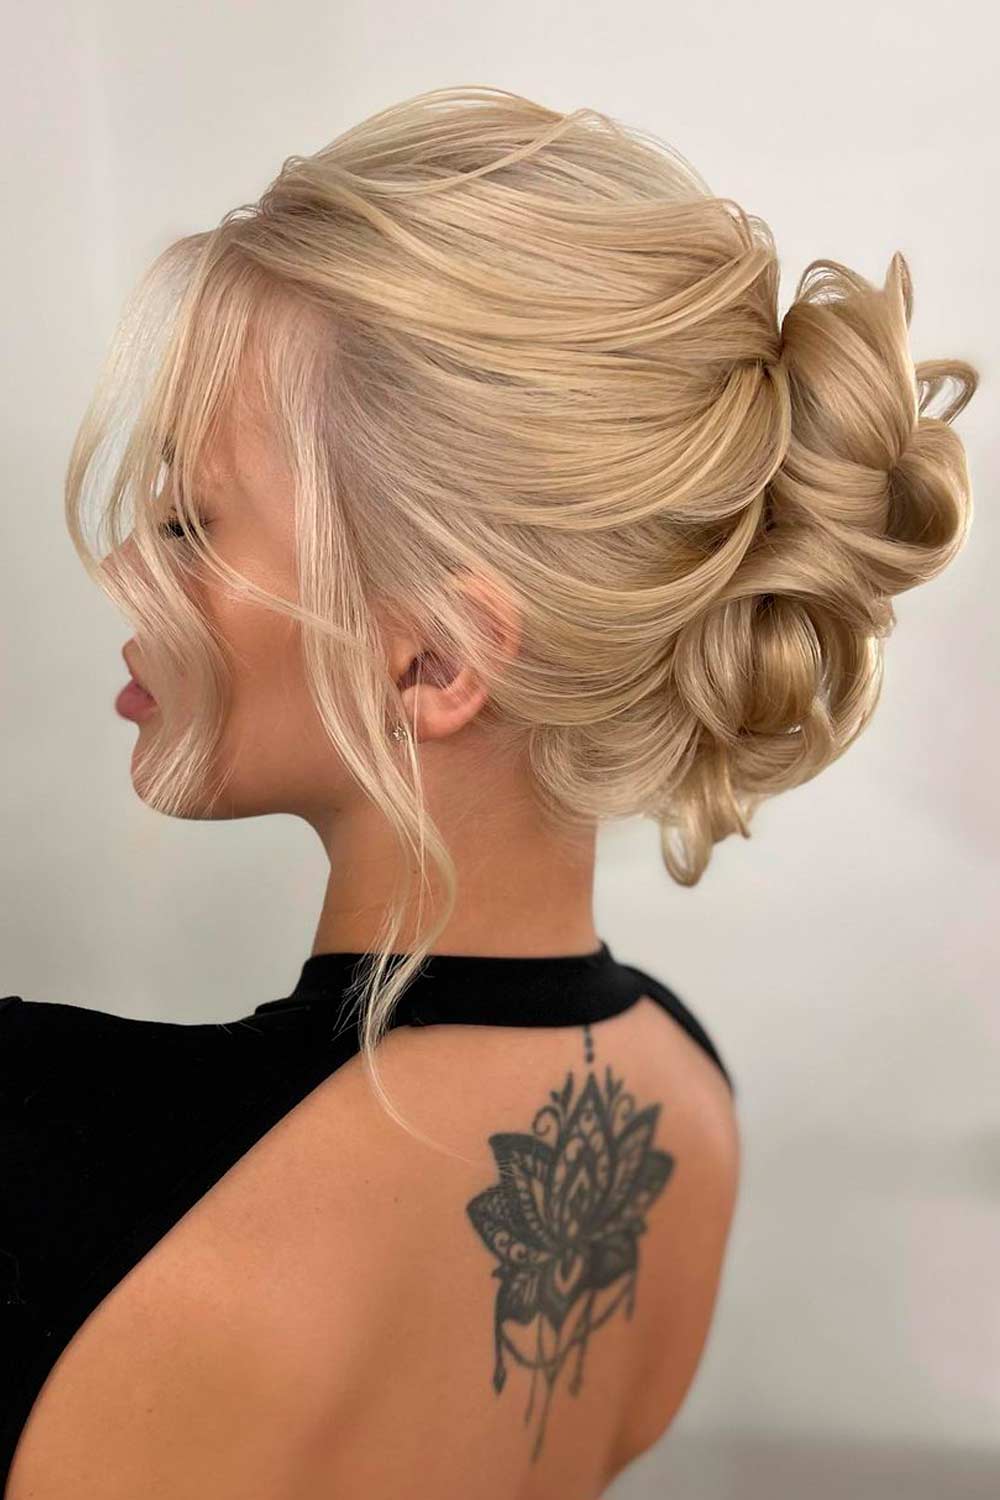 Bun Hairstyles For Prom Night